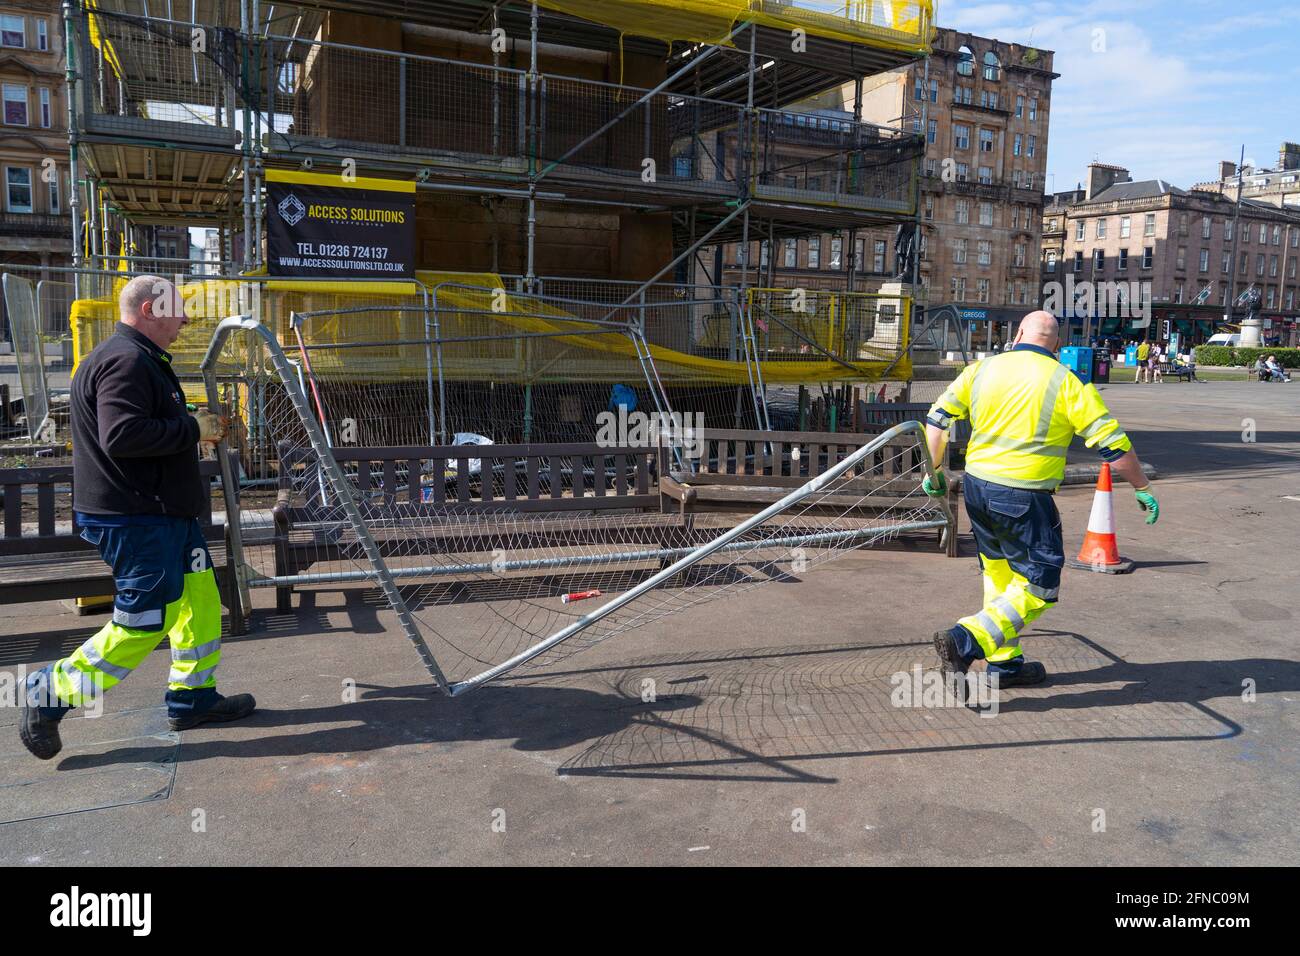 Glasgow, Scotland, UK. 16 May 2021. City cleansing department clearing up damage in George Square after yesterday’s mass celebration by Rangers fans following their Premiership league win. Iain Masterton/Alamy Live News Stock Photo